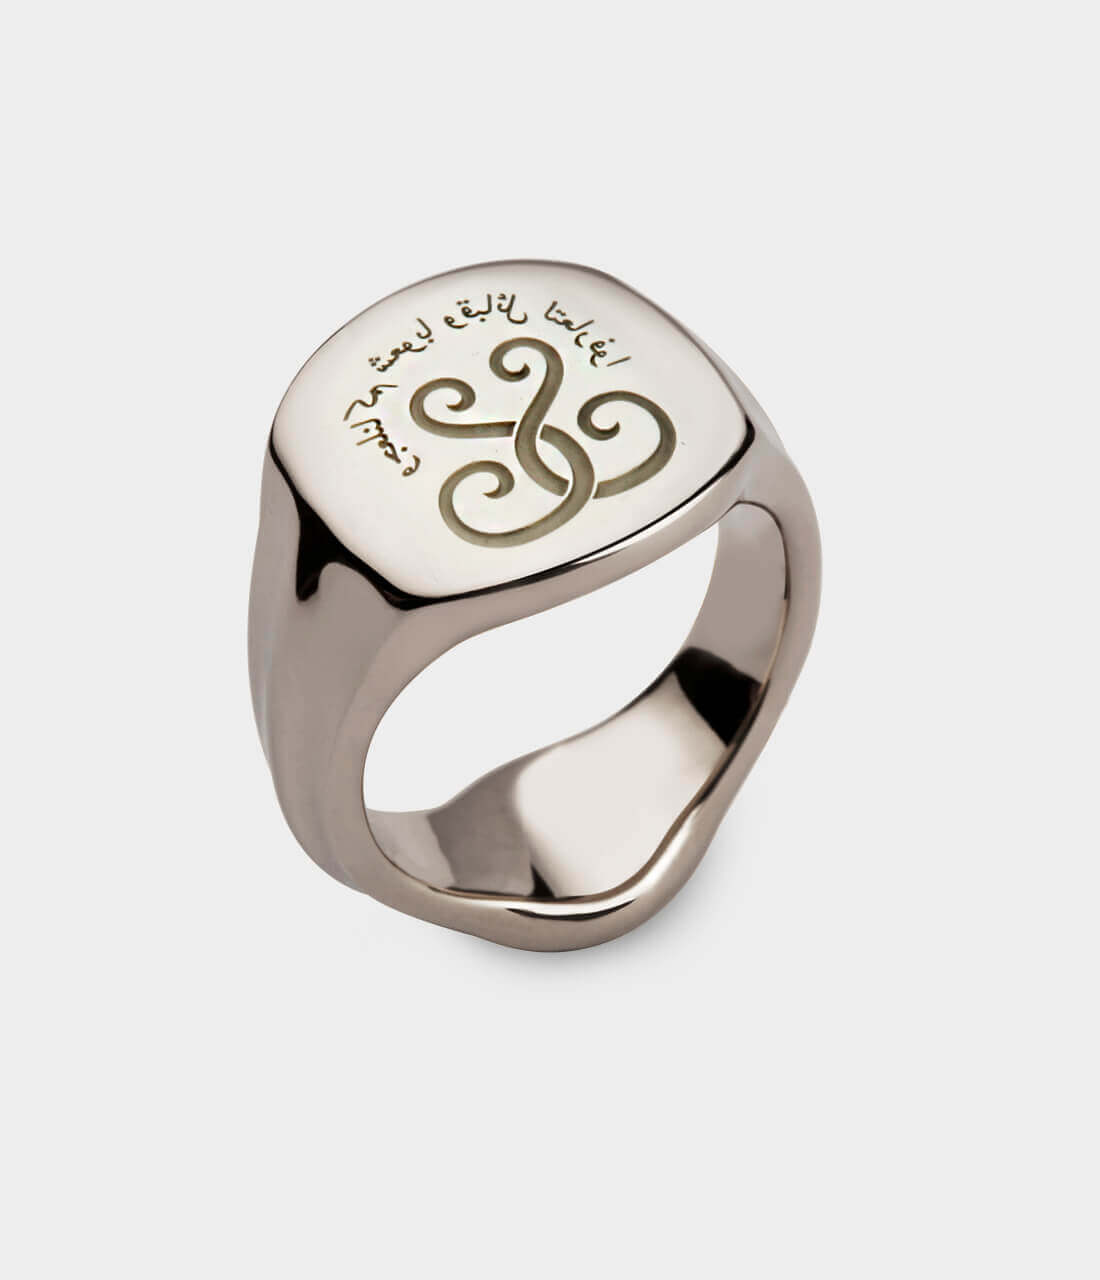 A white gold signet ring with Arabic letters engraved on it